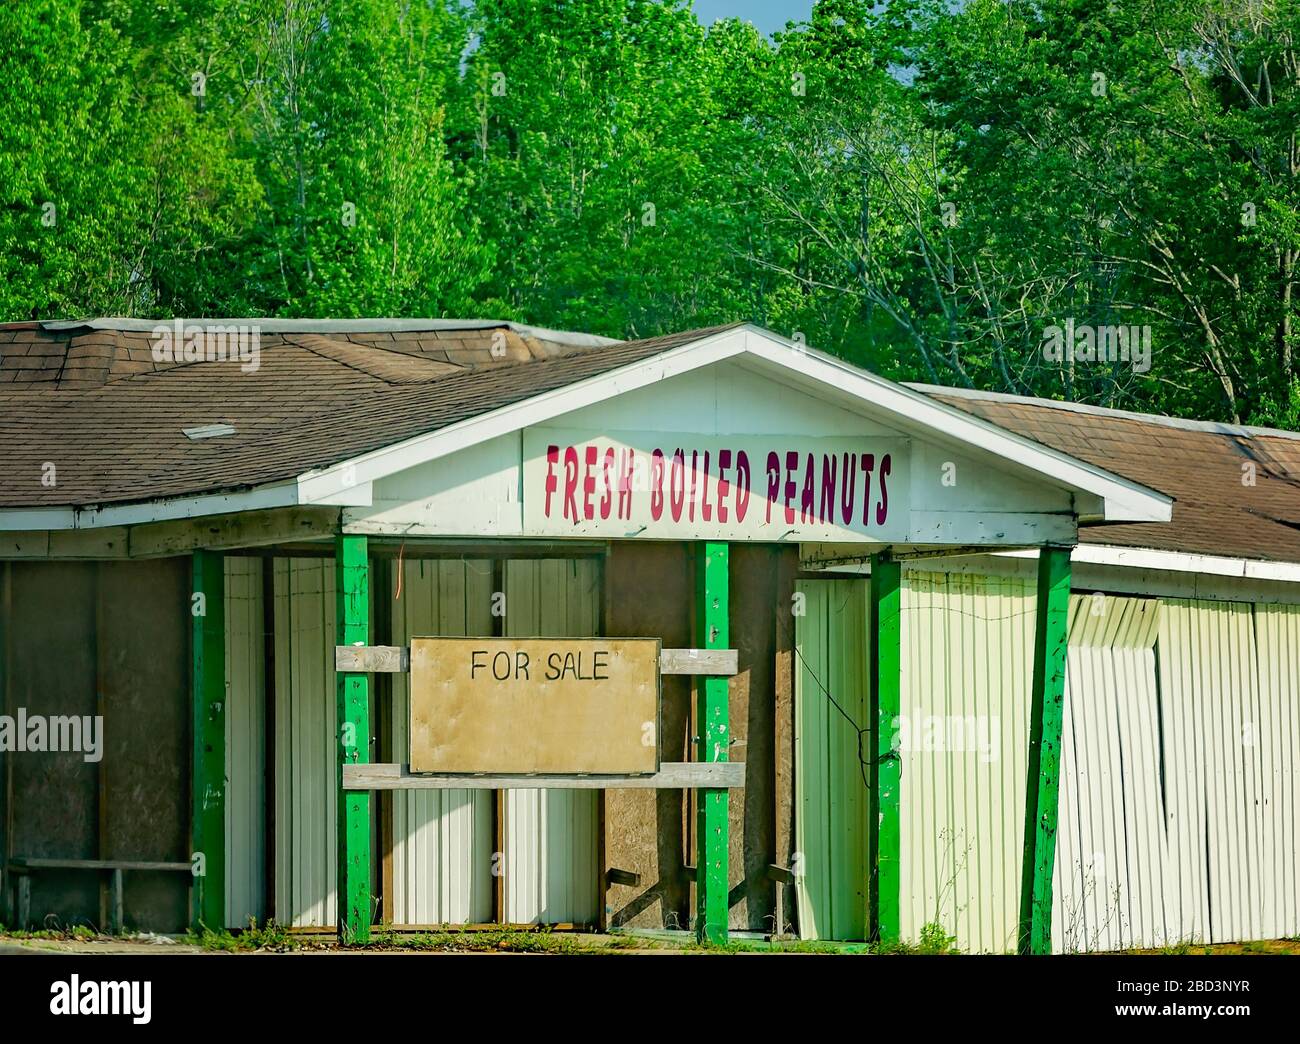 An abandoned store advertises fresh boiled peanuts, March 29, 2020, in Mobile, Alabama. Boiled peanuts are a popular snack in the American South. Stock Photo